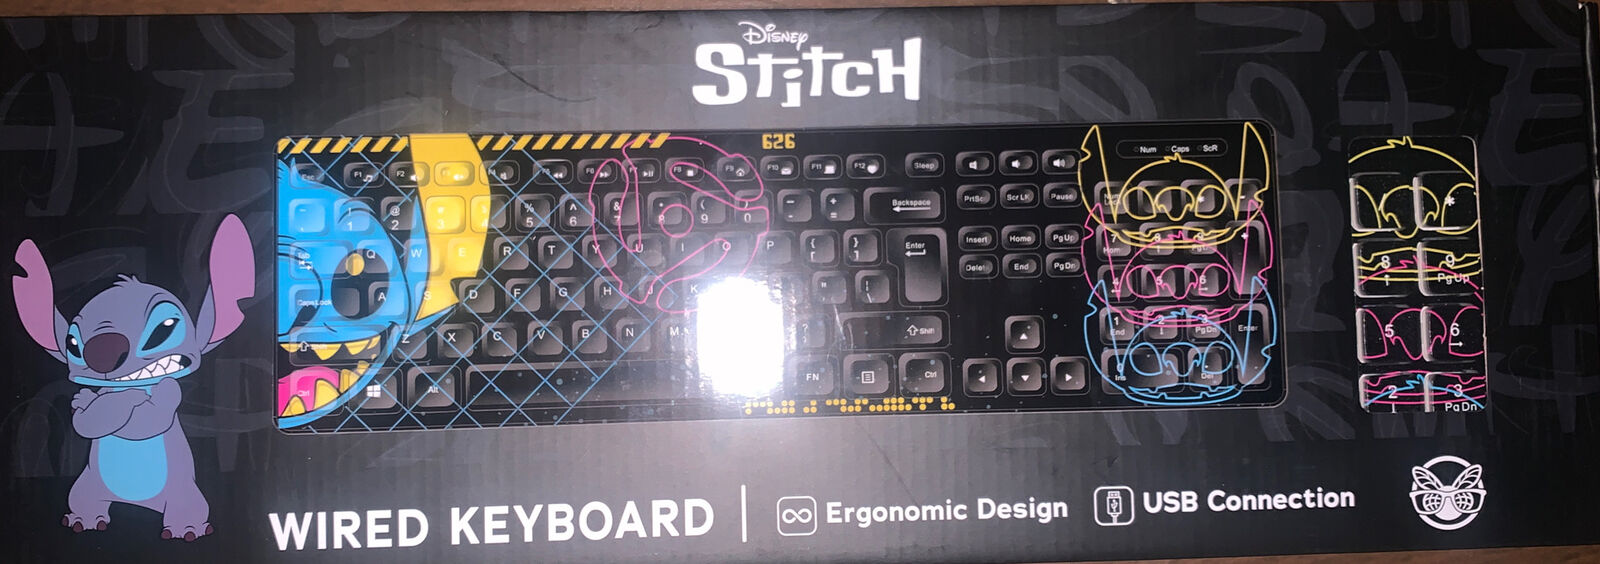 Rare Culturefly Disney Stitch Wired Keyboard - Limited Edition Collectible